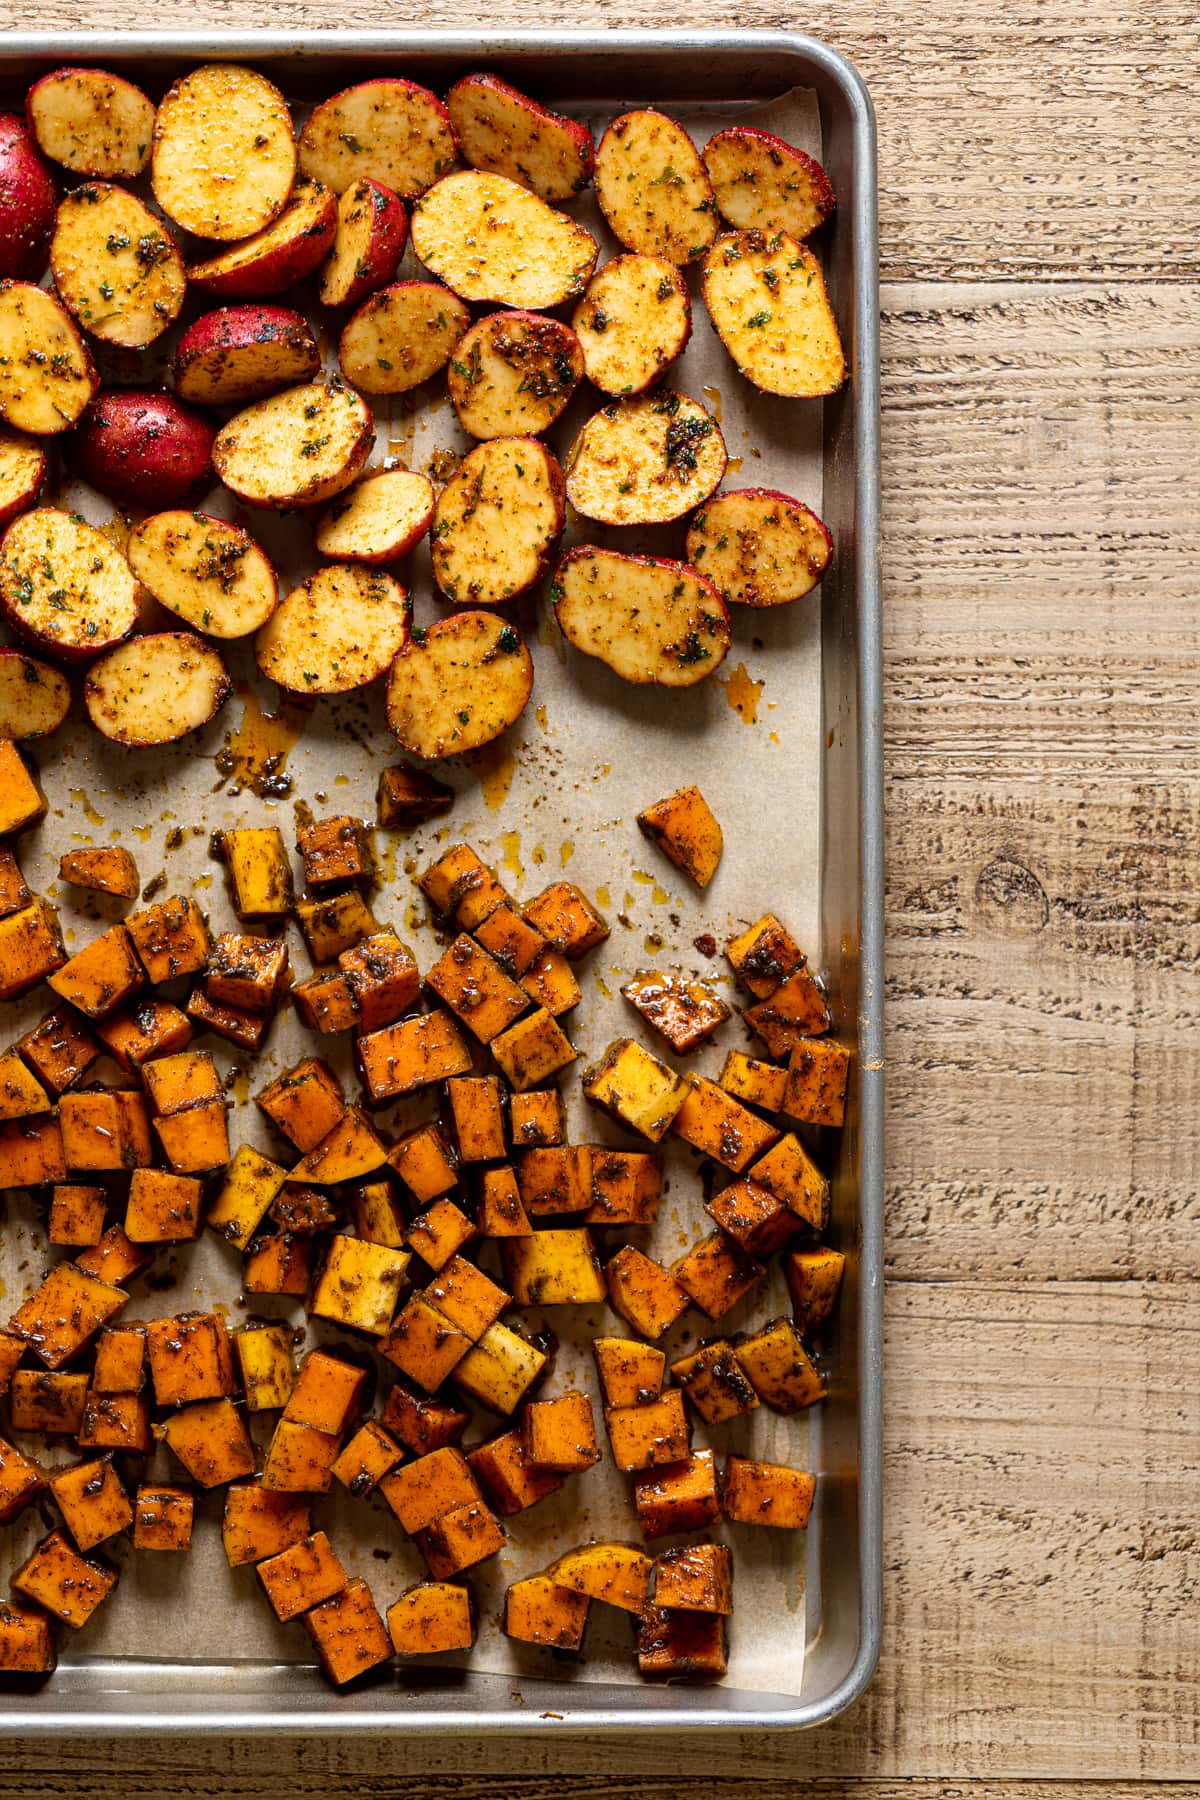 Roasted, chopped, and seasoned vegetables on a baking sheet